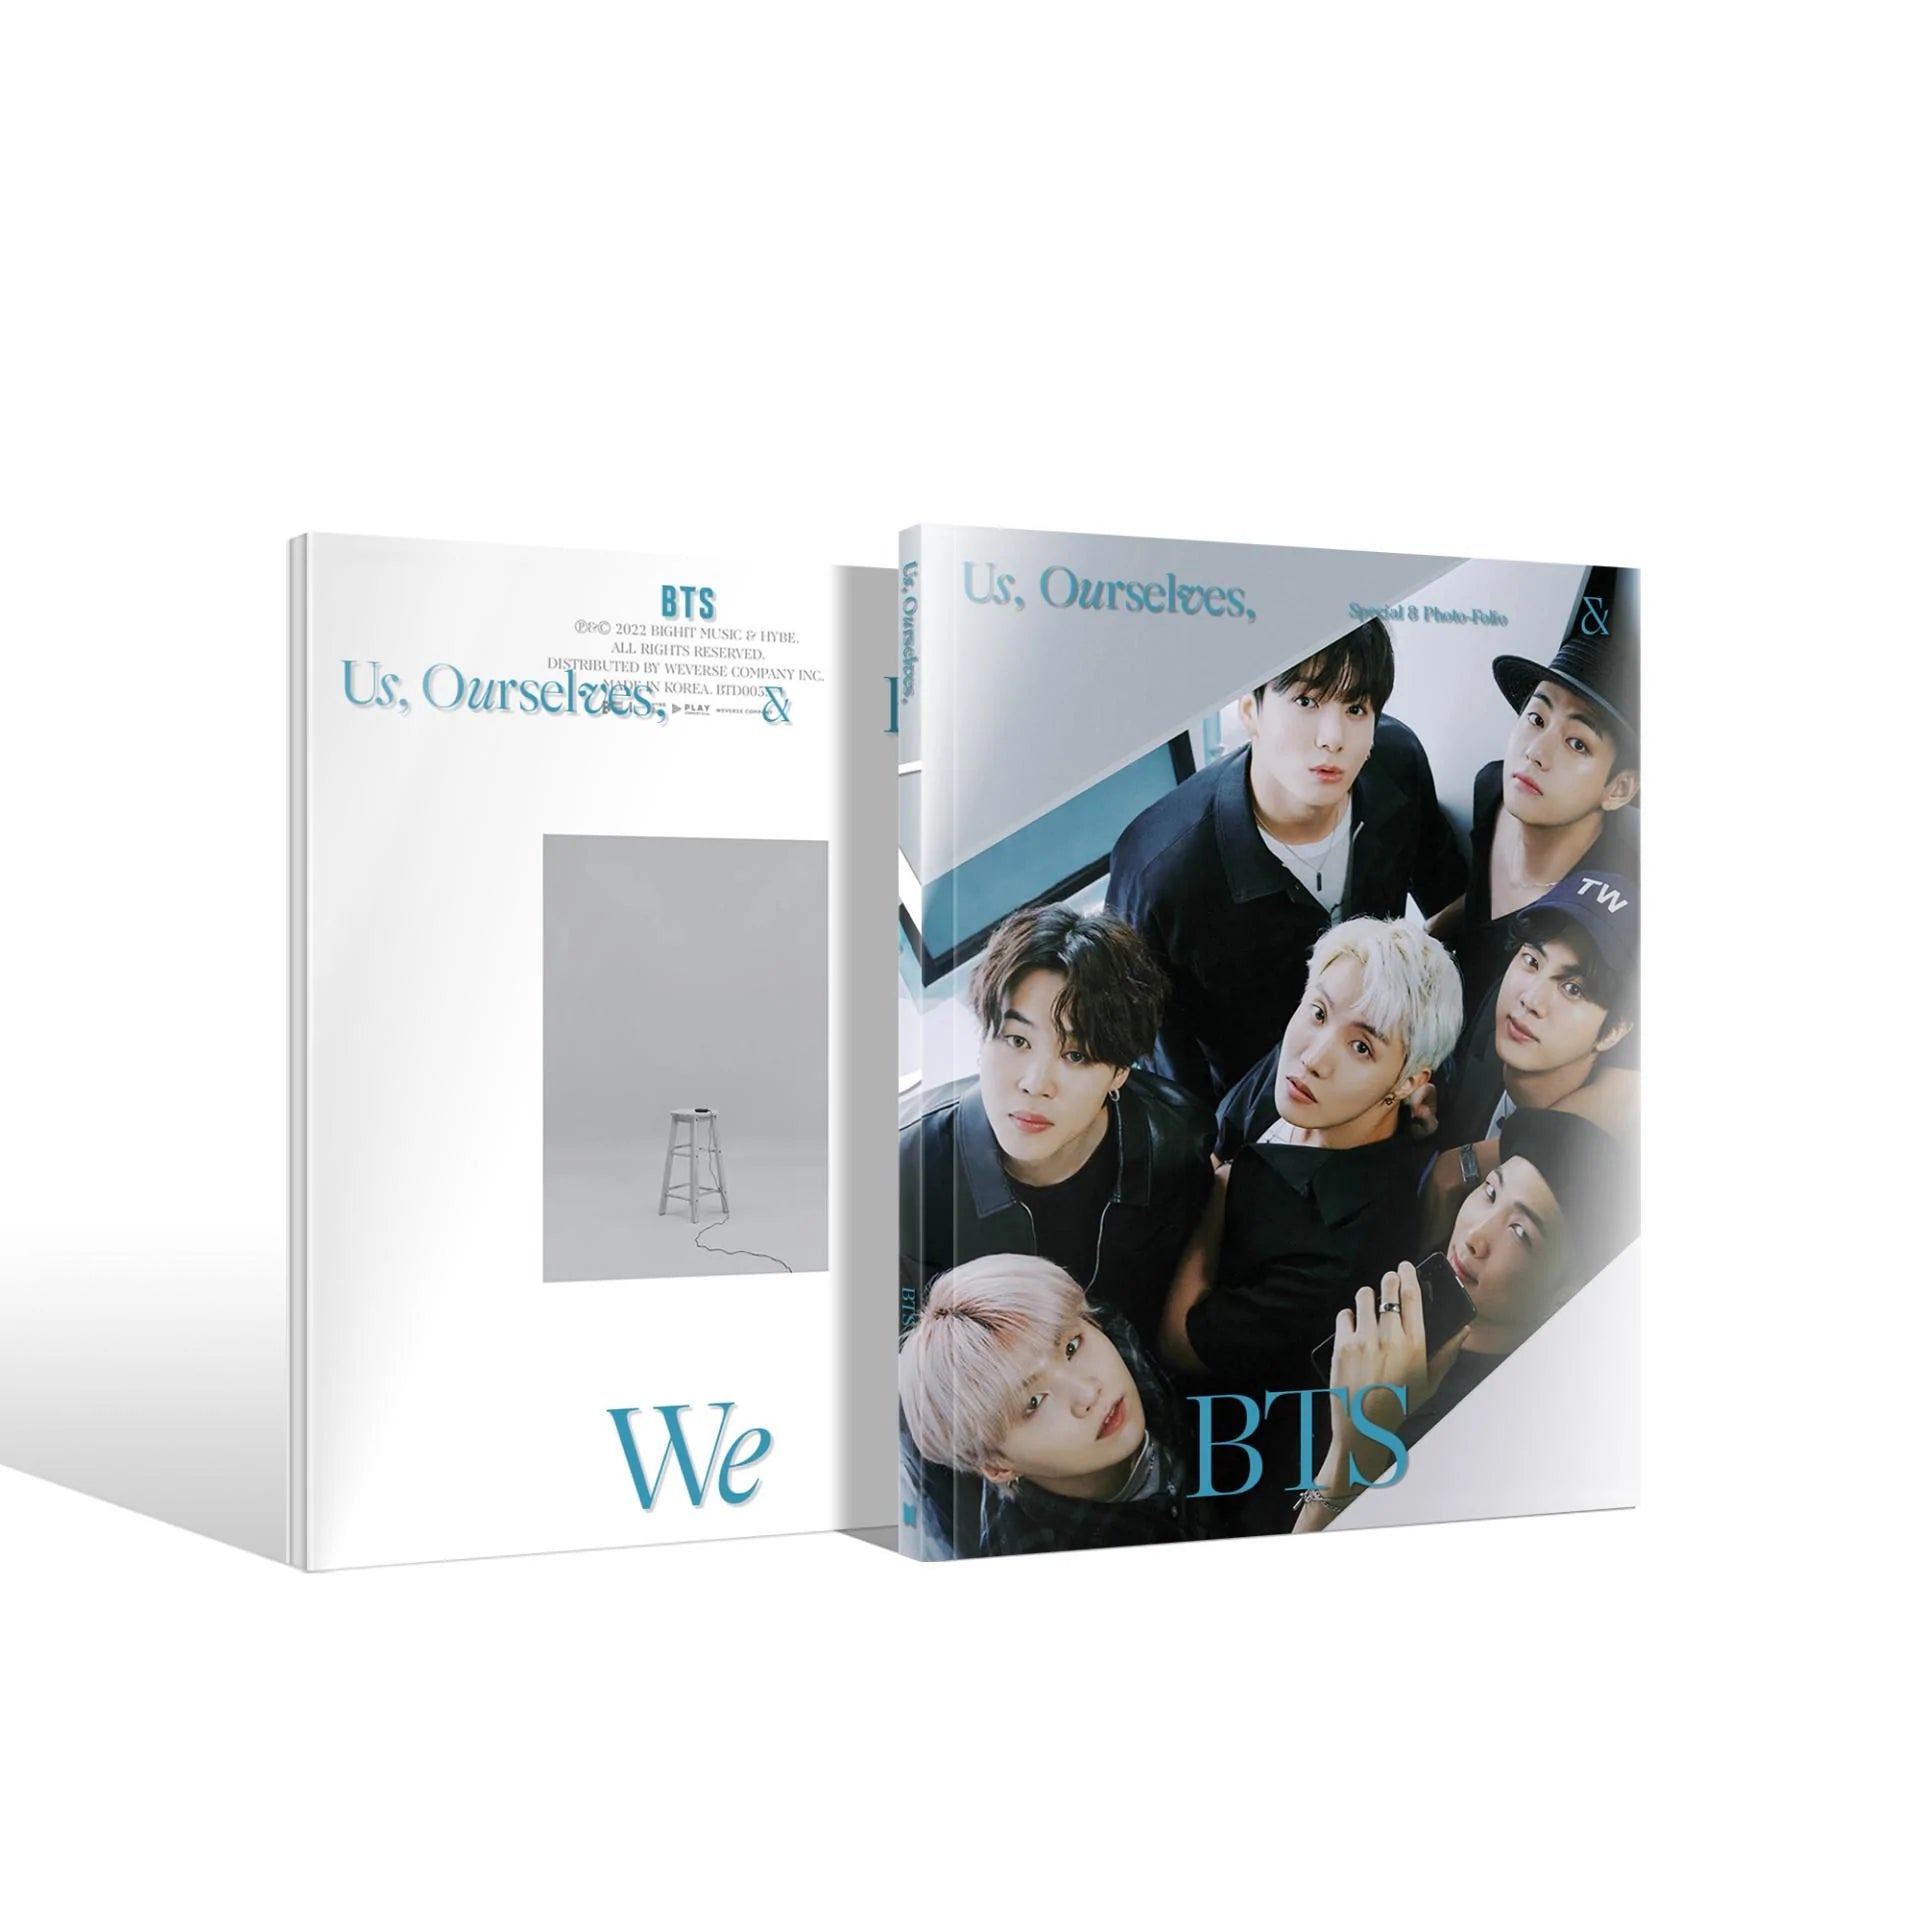 BTS SPECIAL 8 PHOTO-FOLIO US, OURSELVES, AND BTS 'WE' cover